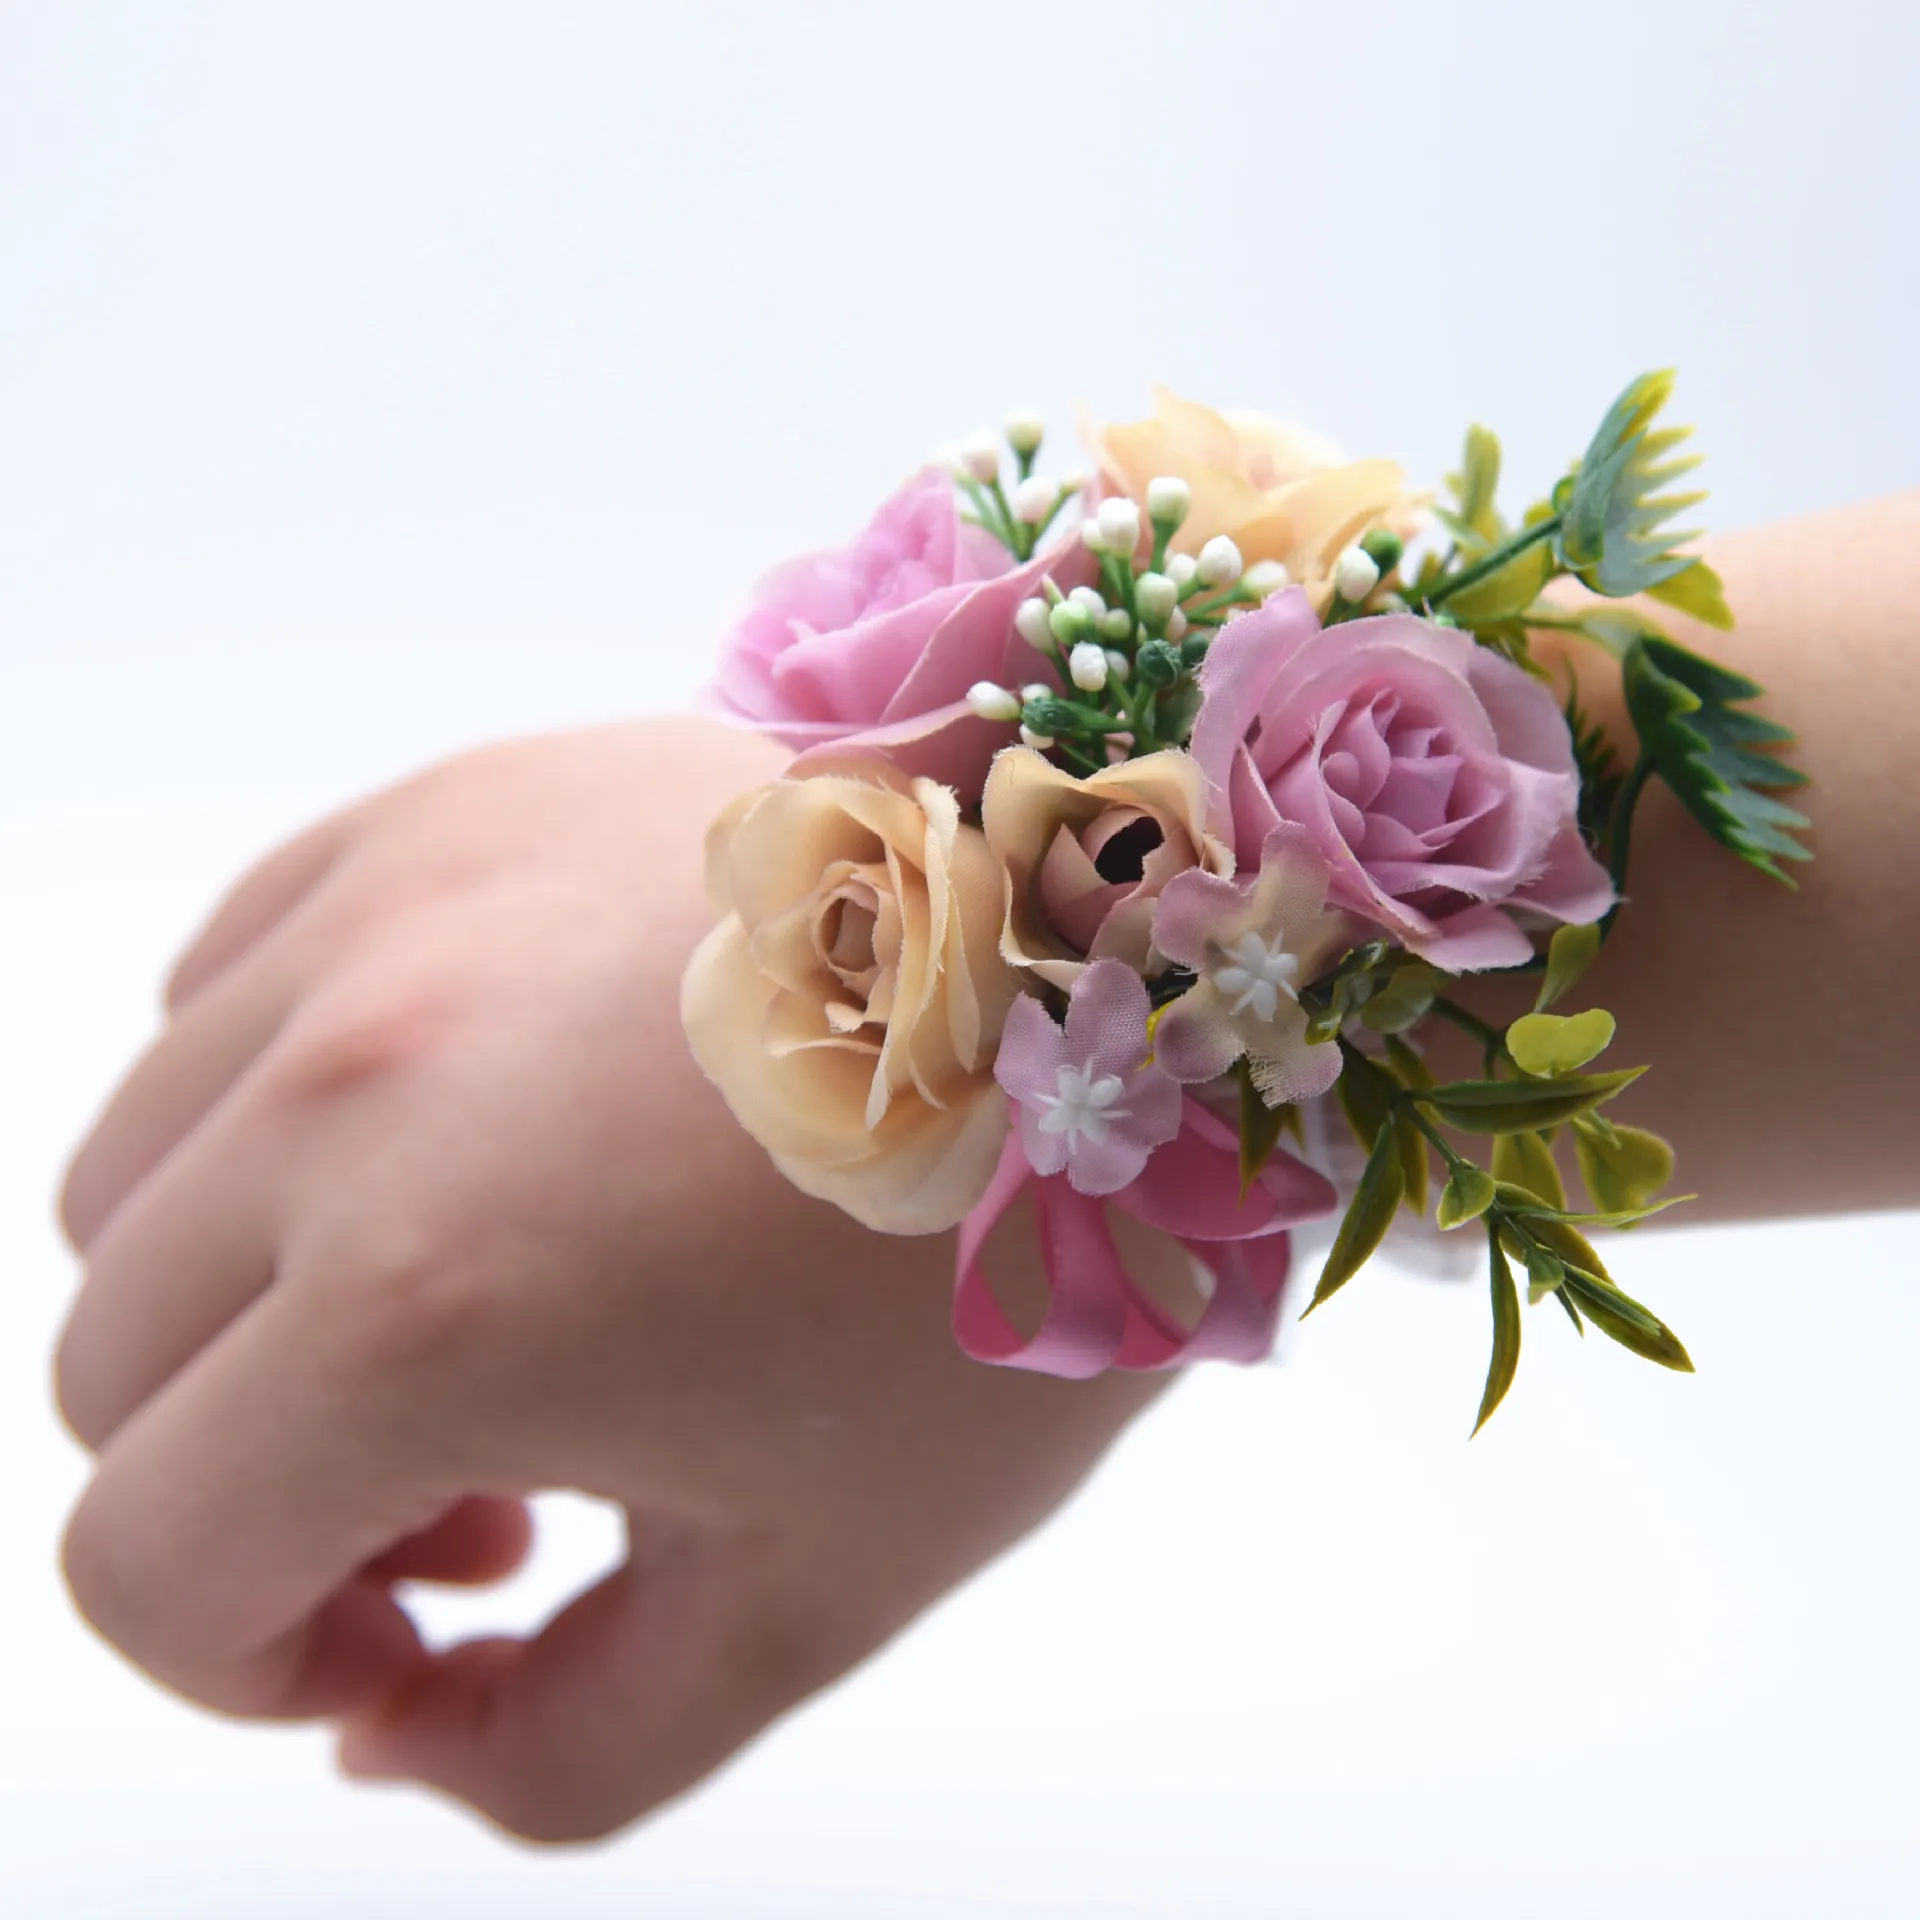 Buy Tiny Store Wrist Corsage Braided Leaves Bridal Bracelet Wedding Hand  Flower Red (59018632TS) Online at Low Prices in India - Amazon.in